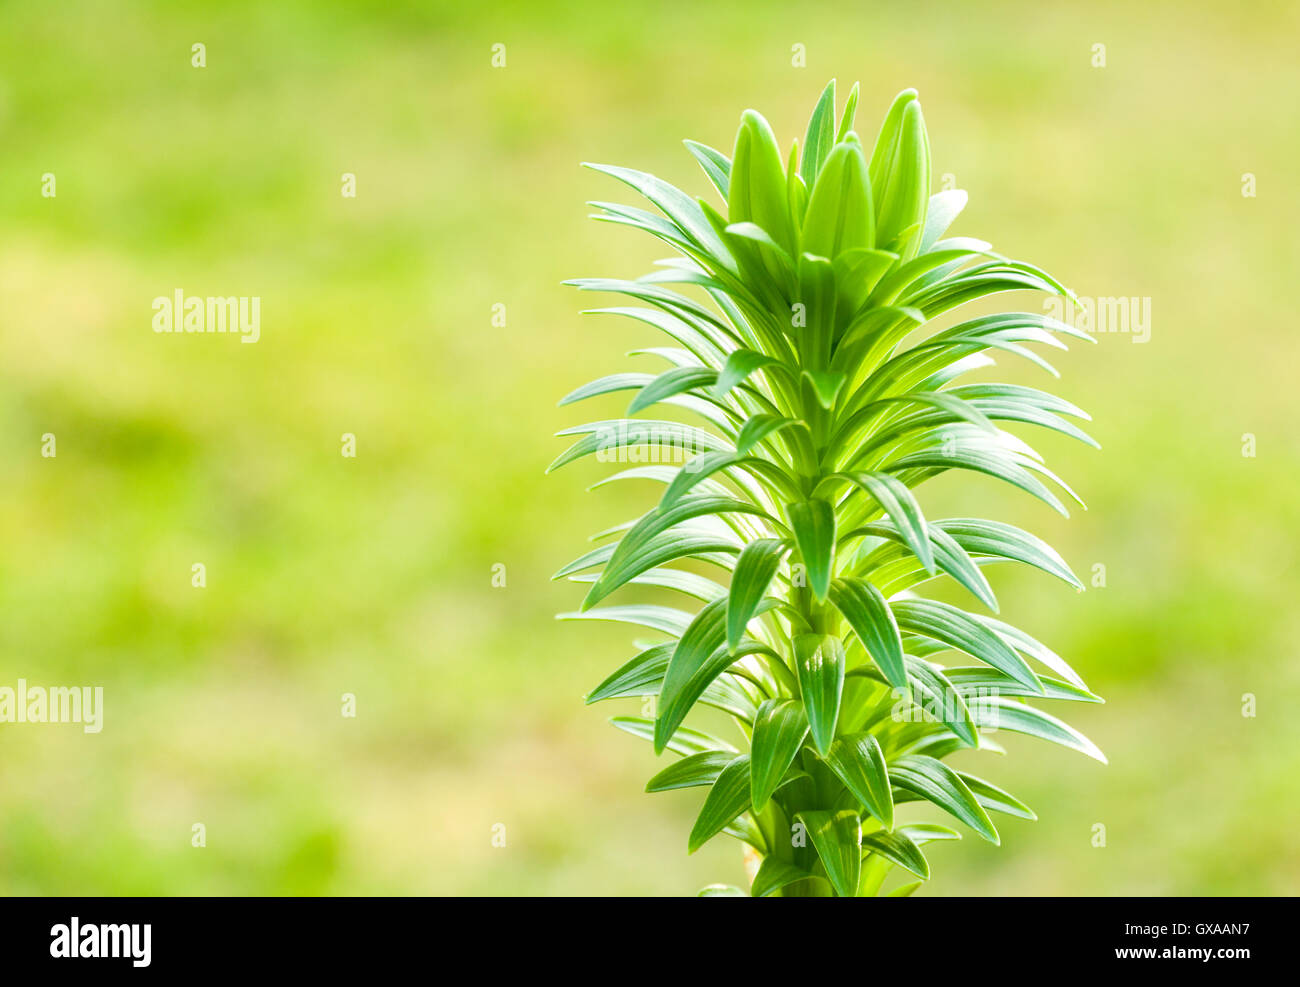 Botanic gardening nature image: young spring sprout of white lily (lilium) with three flowers buds closeup Stock Photo